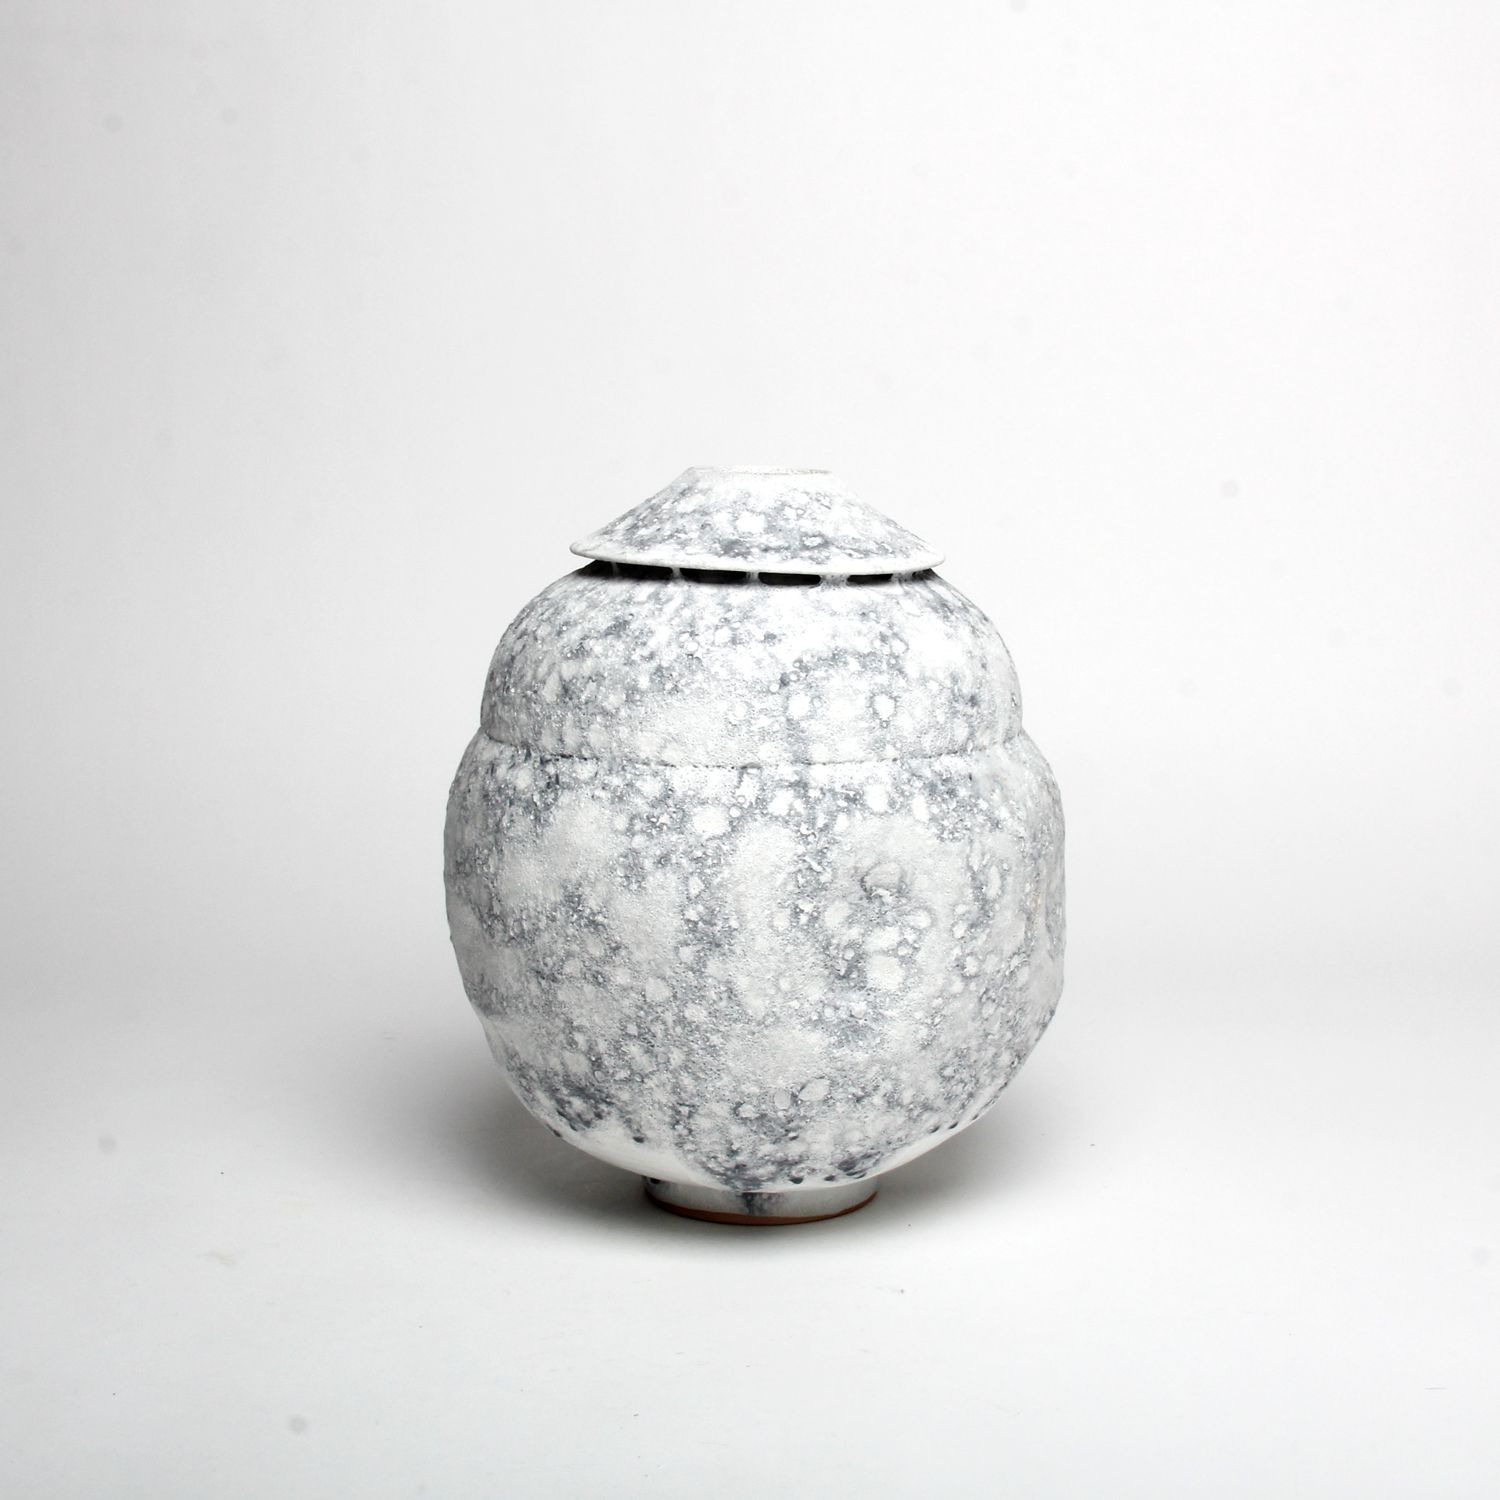 Kayo O’Young: Crater Vase Product Image 4 of 4